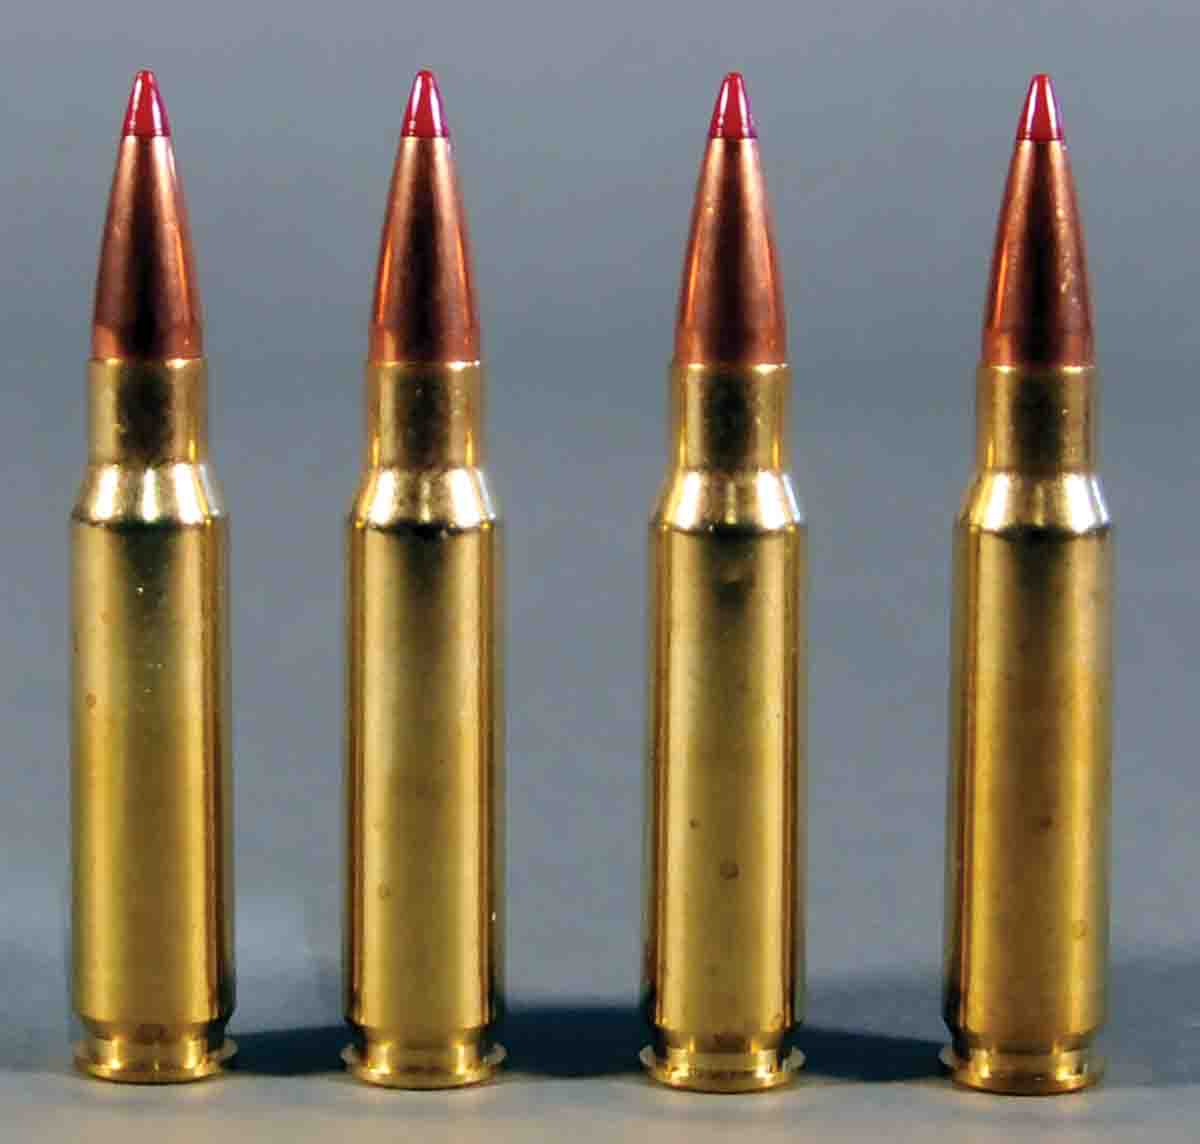 The Black Hills ammunition shot very well and represented the type of accuracy hunters need for big-game hunting.